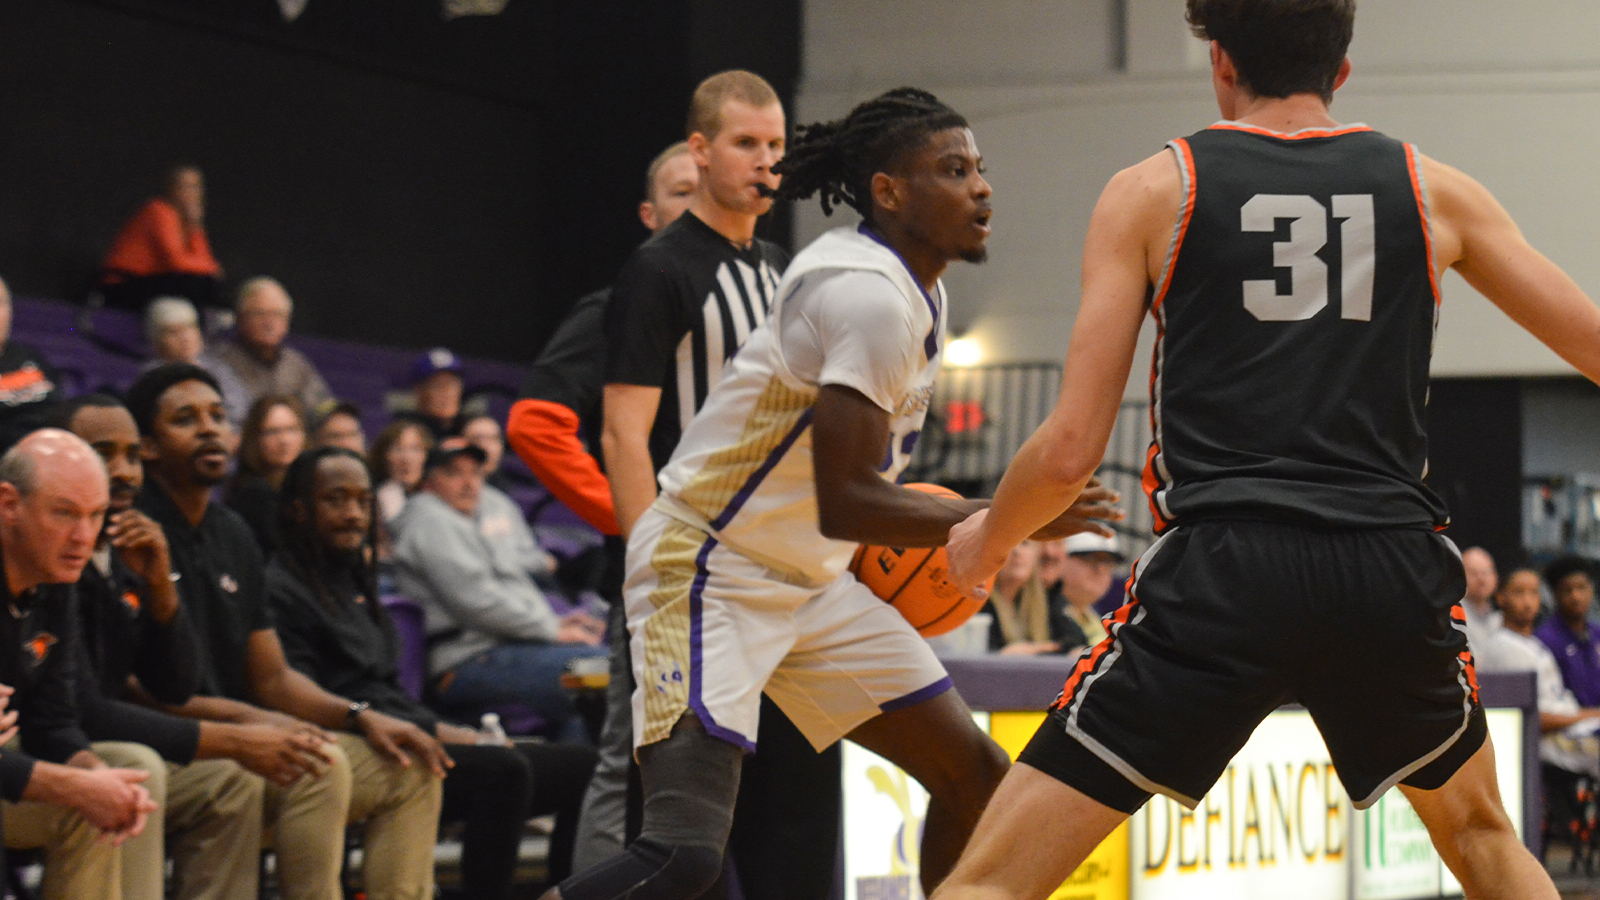 MBB Preview: HCAC's top scorers go head-to-head in Jackets' trip to Anderson